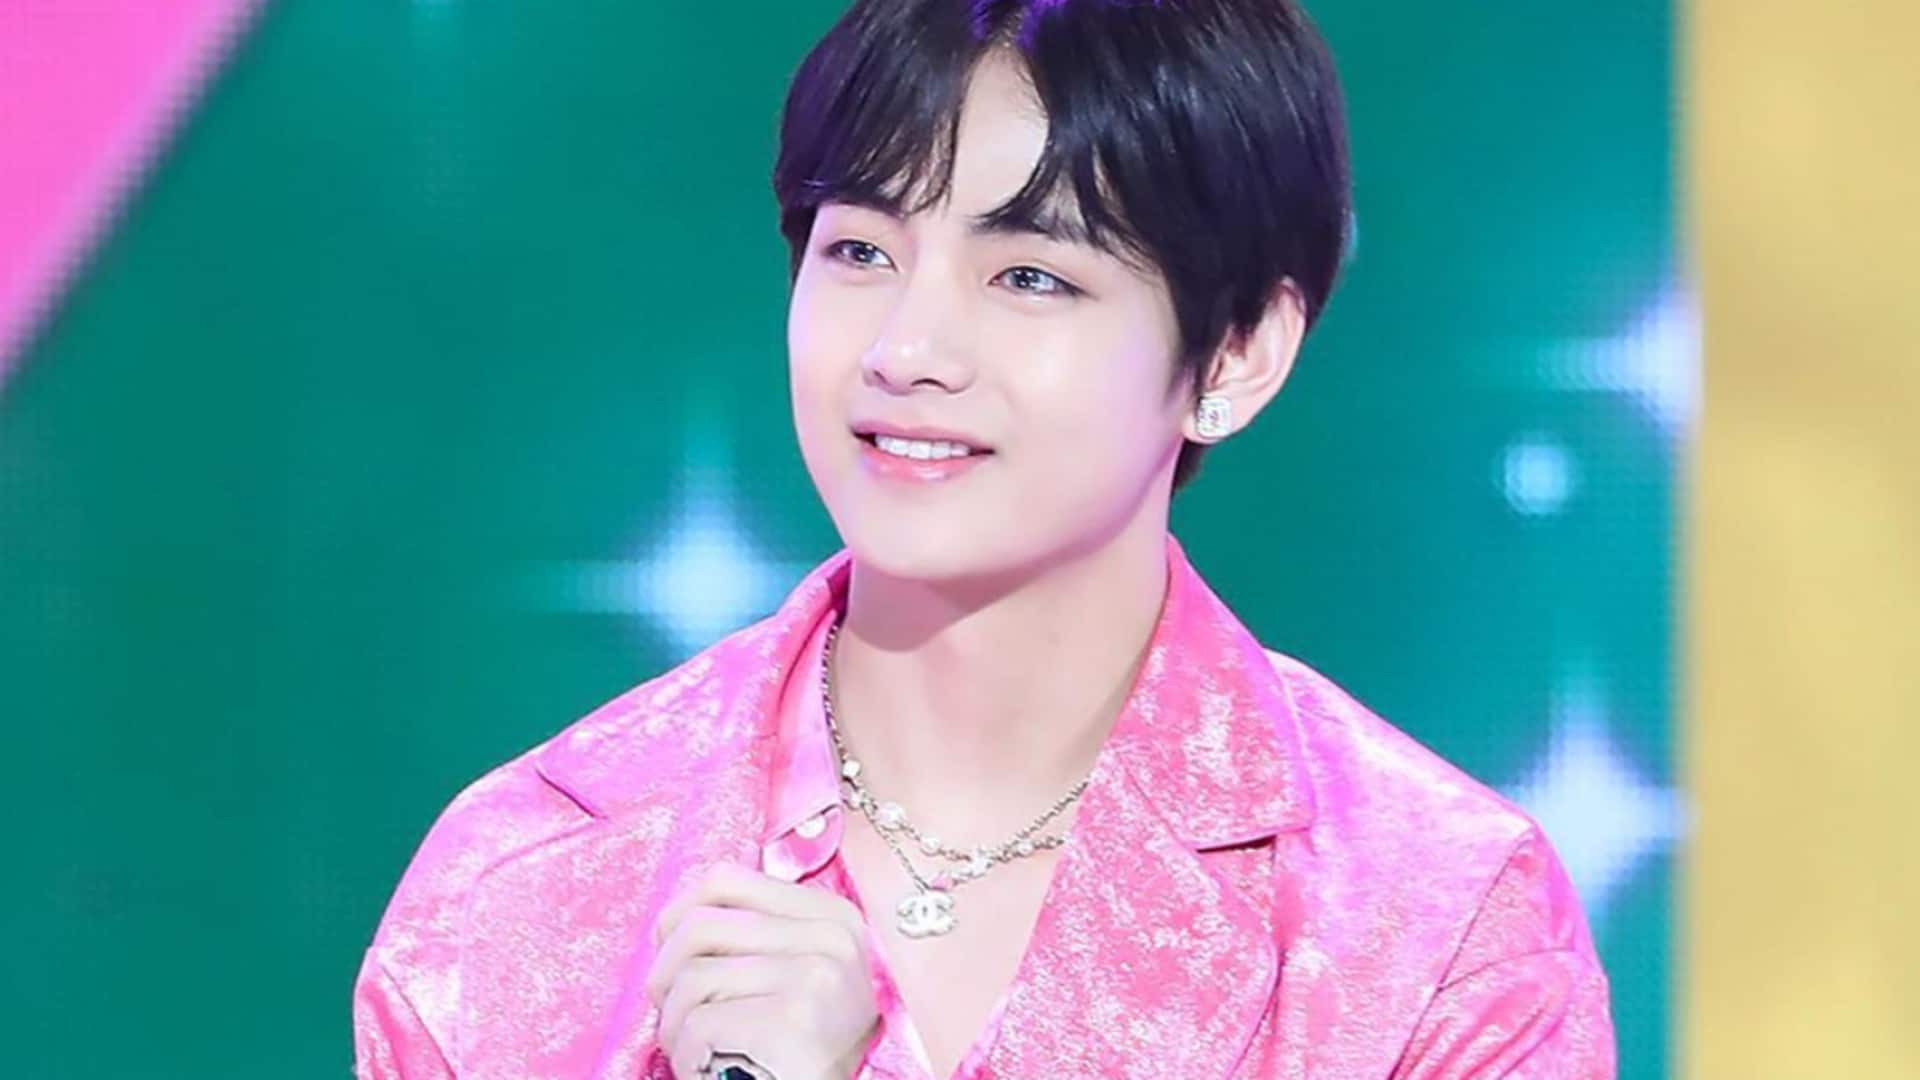 'FRI(END)S': BTS V's new single music video out now